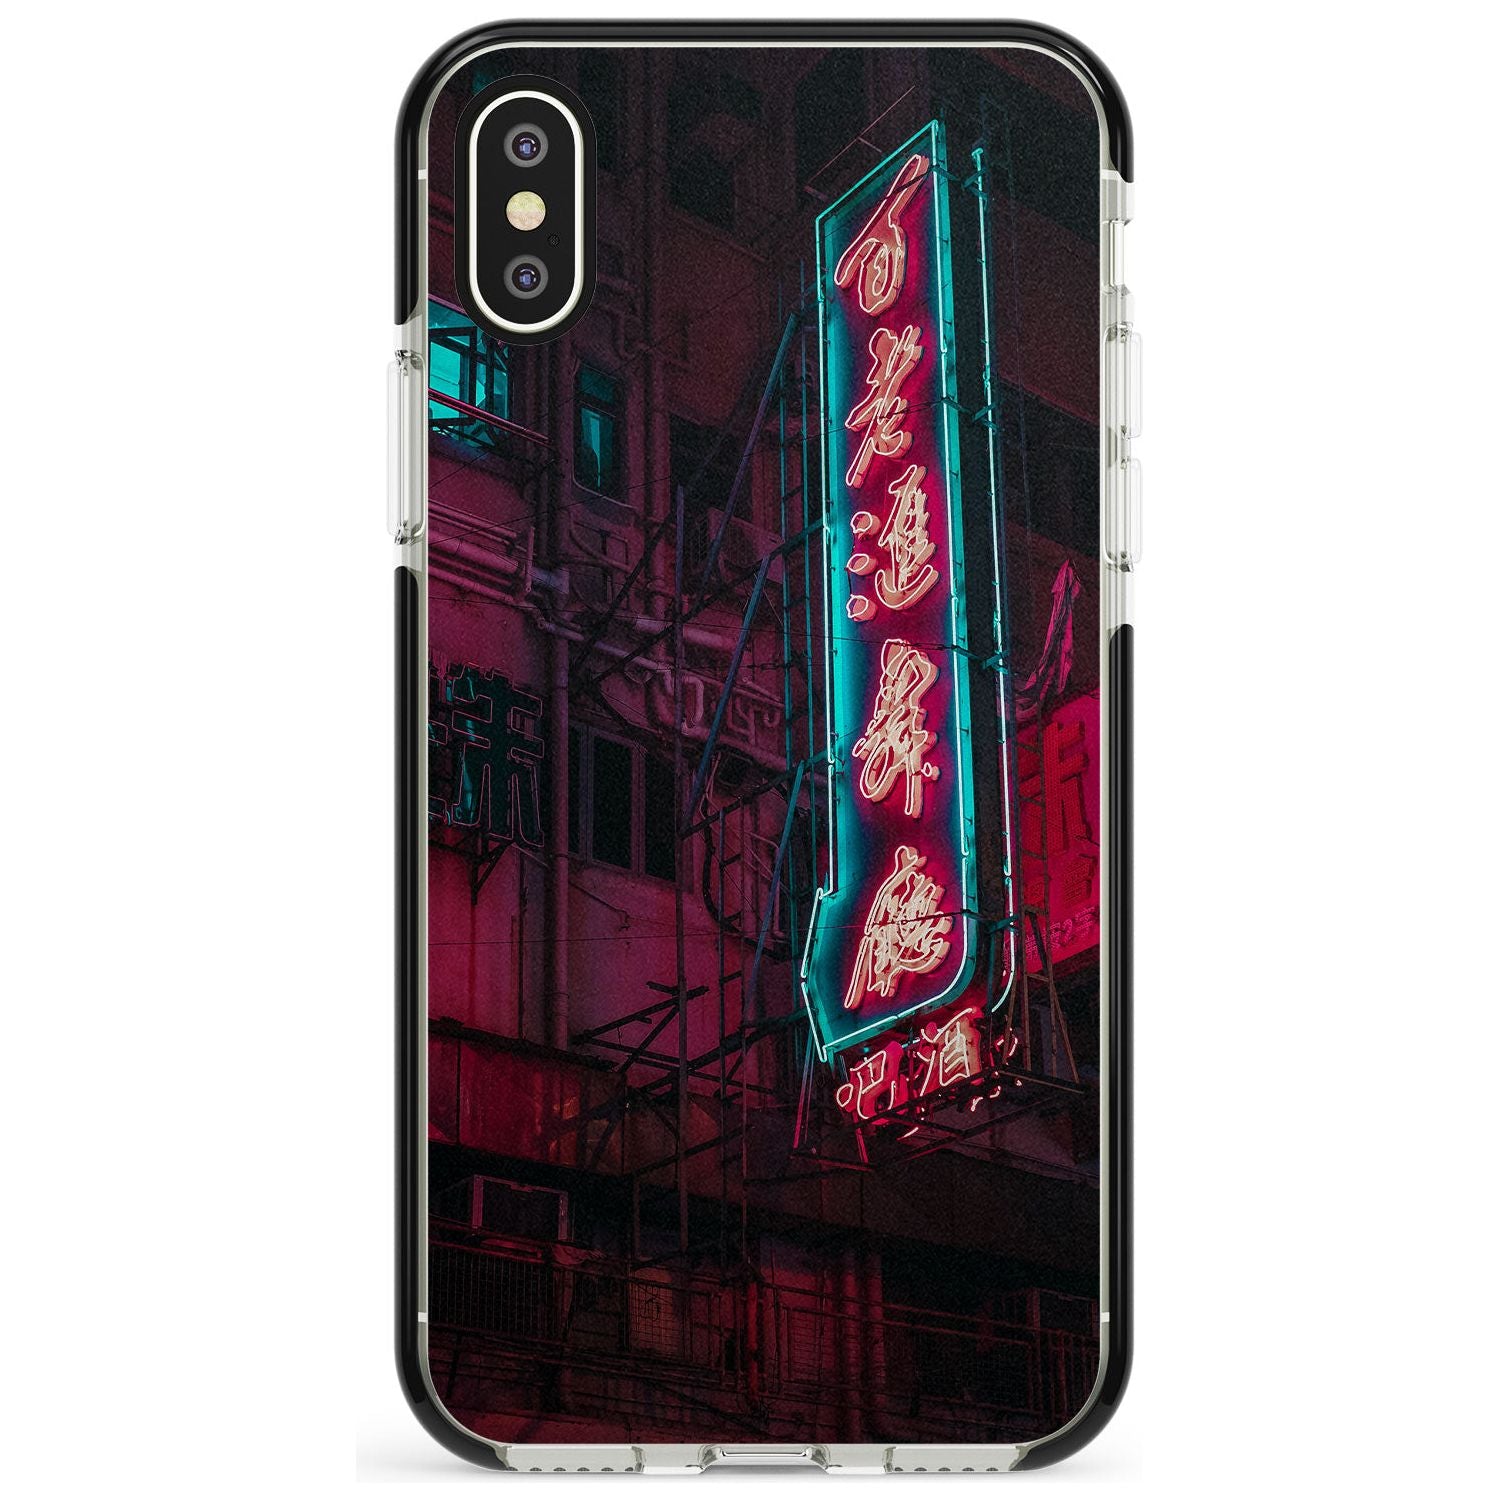 Large Kanji Sign - Neon Cities Photographs Black Impact Phone Case for iPhone X XS Max XR